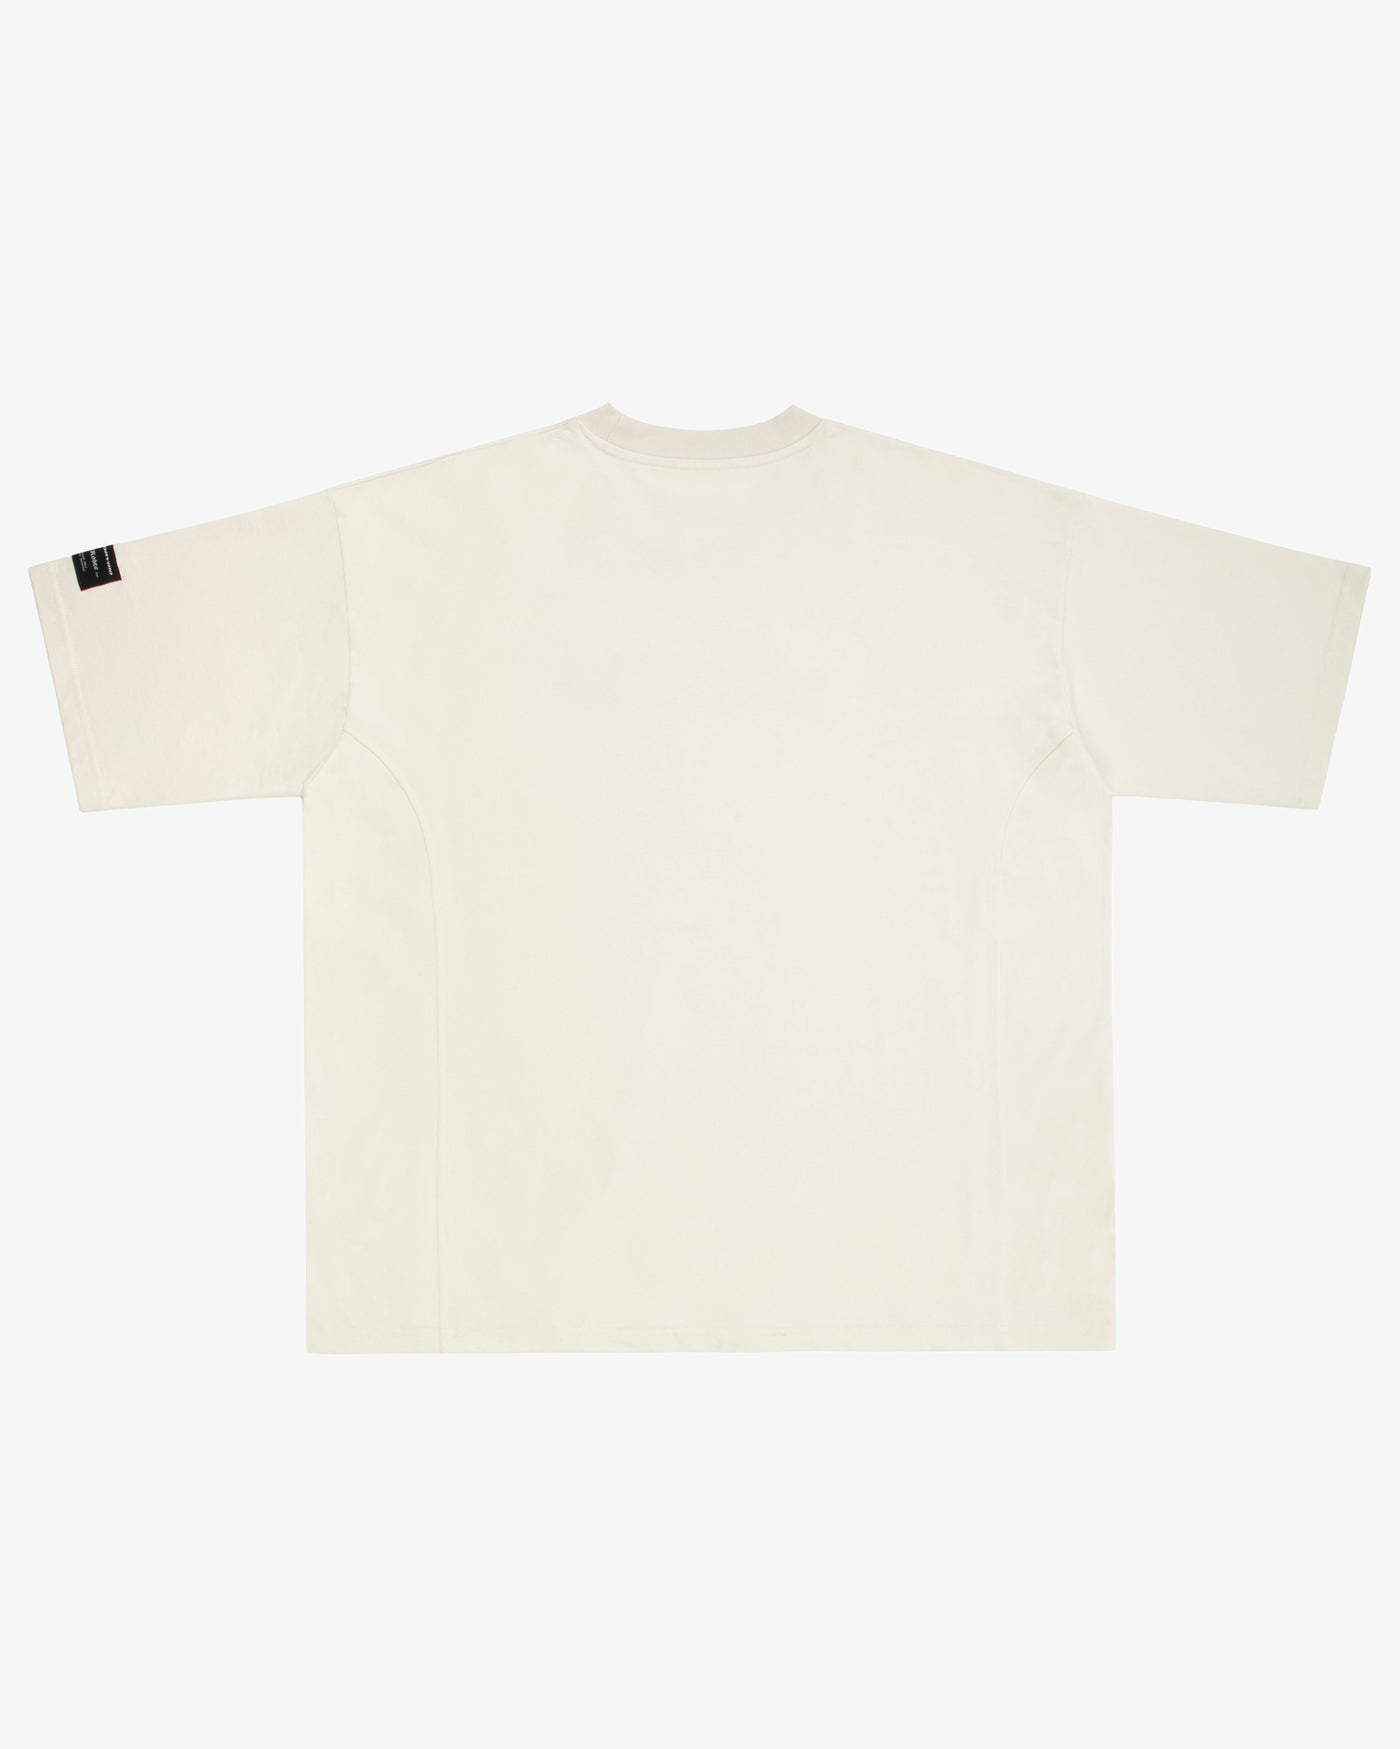 COWBOY STRING FRONTIER HEAVYWEIGHT TEE / OFF WHITE